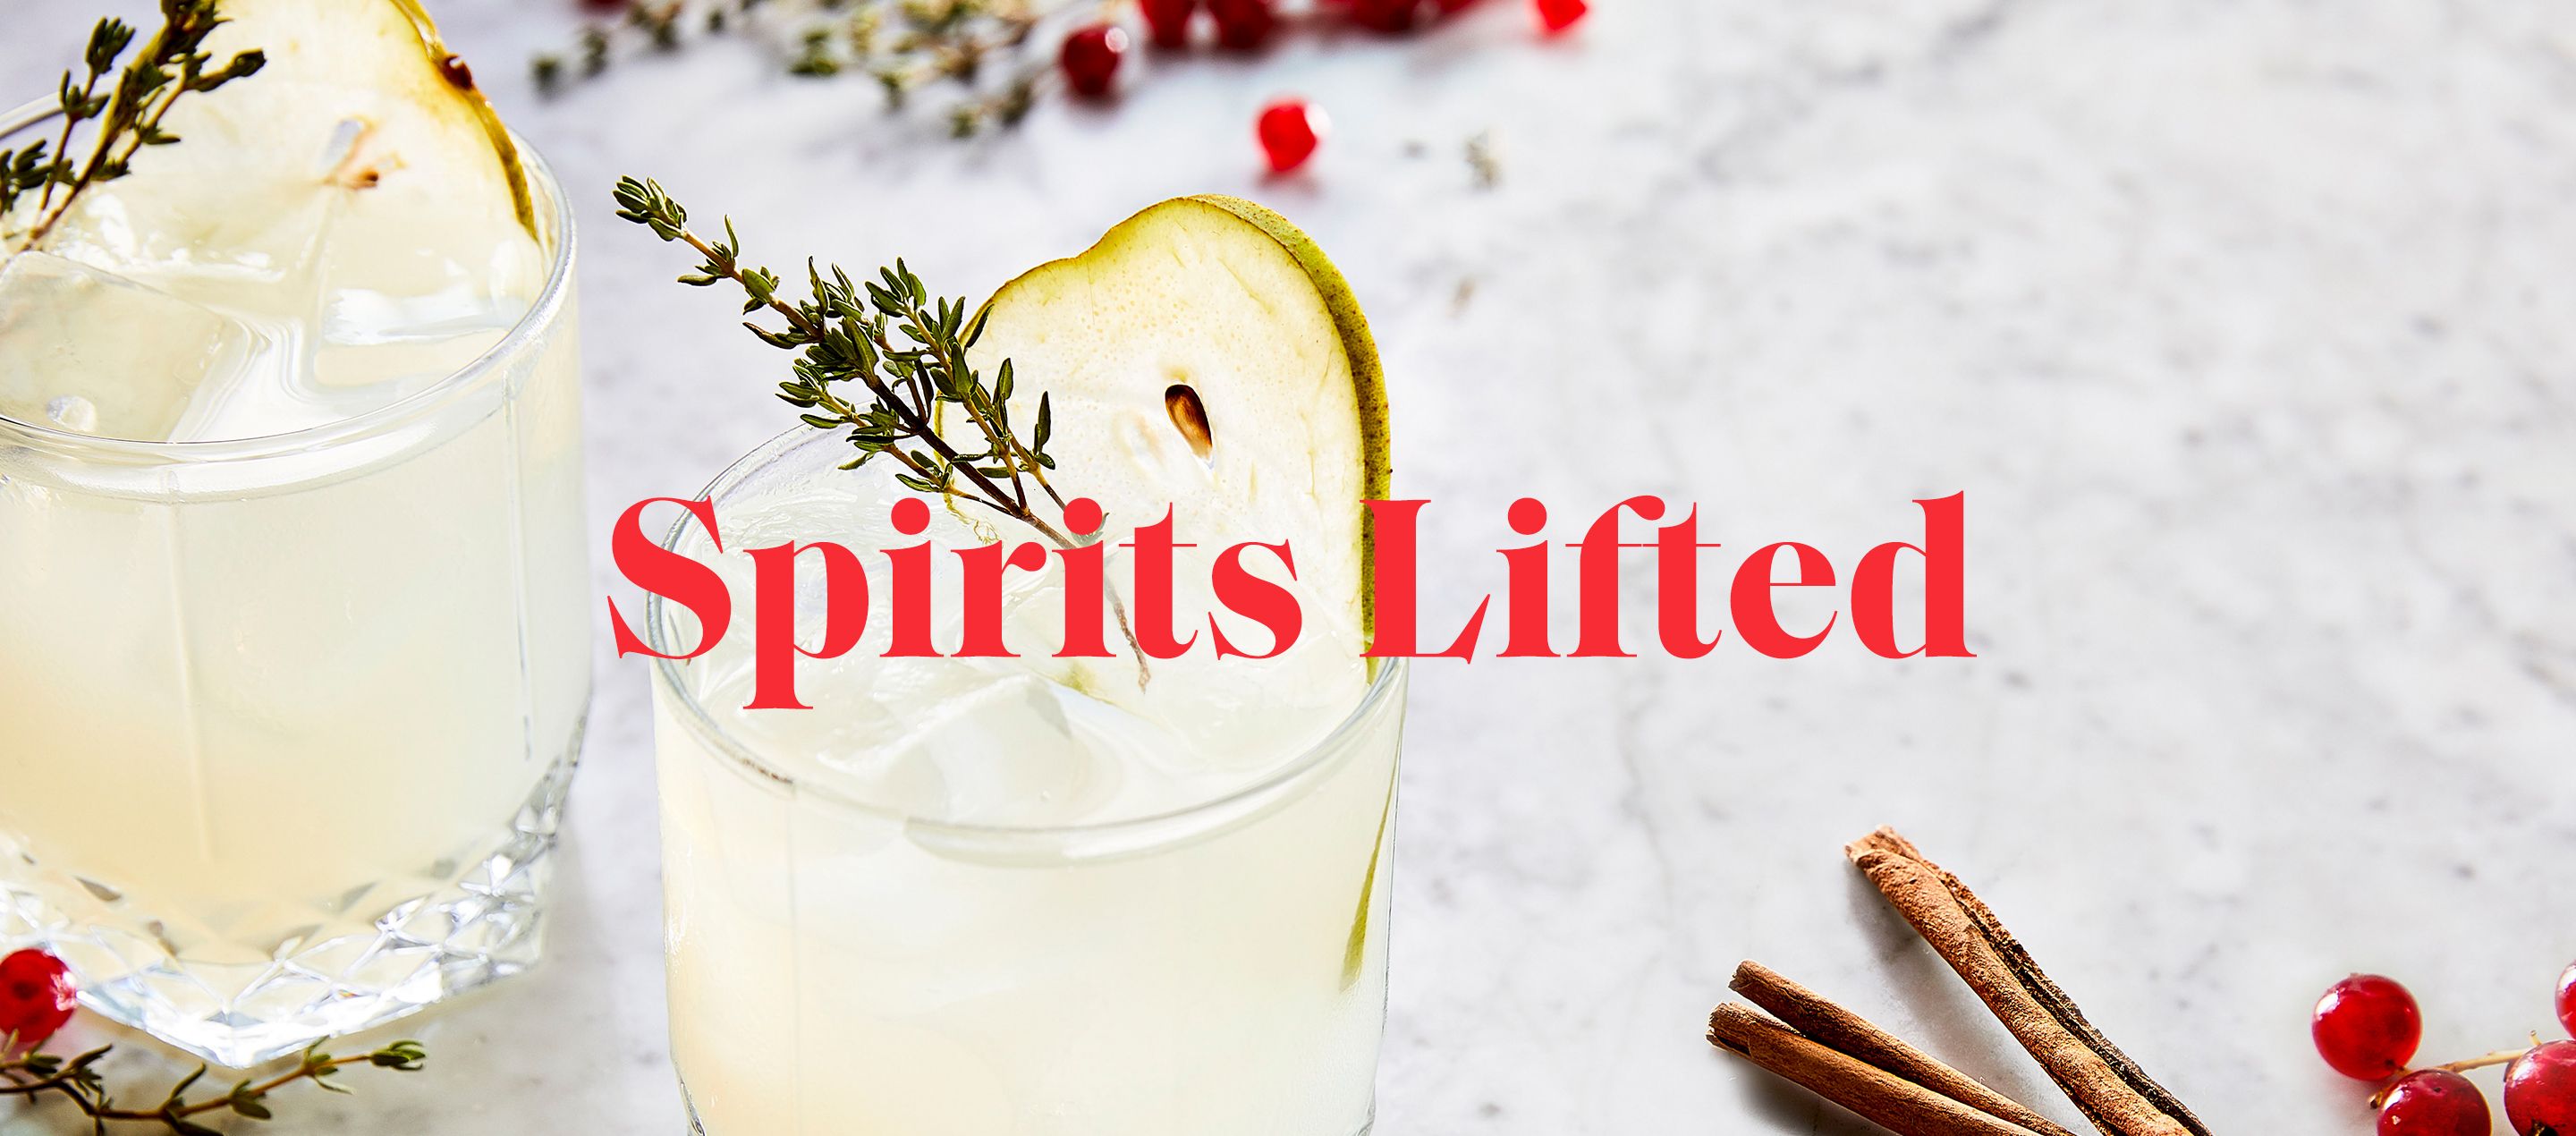 Two mixed spirited drinks with garnishes